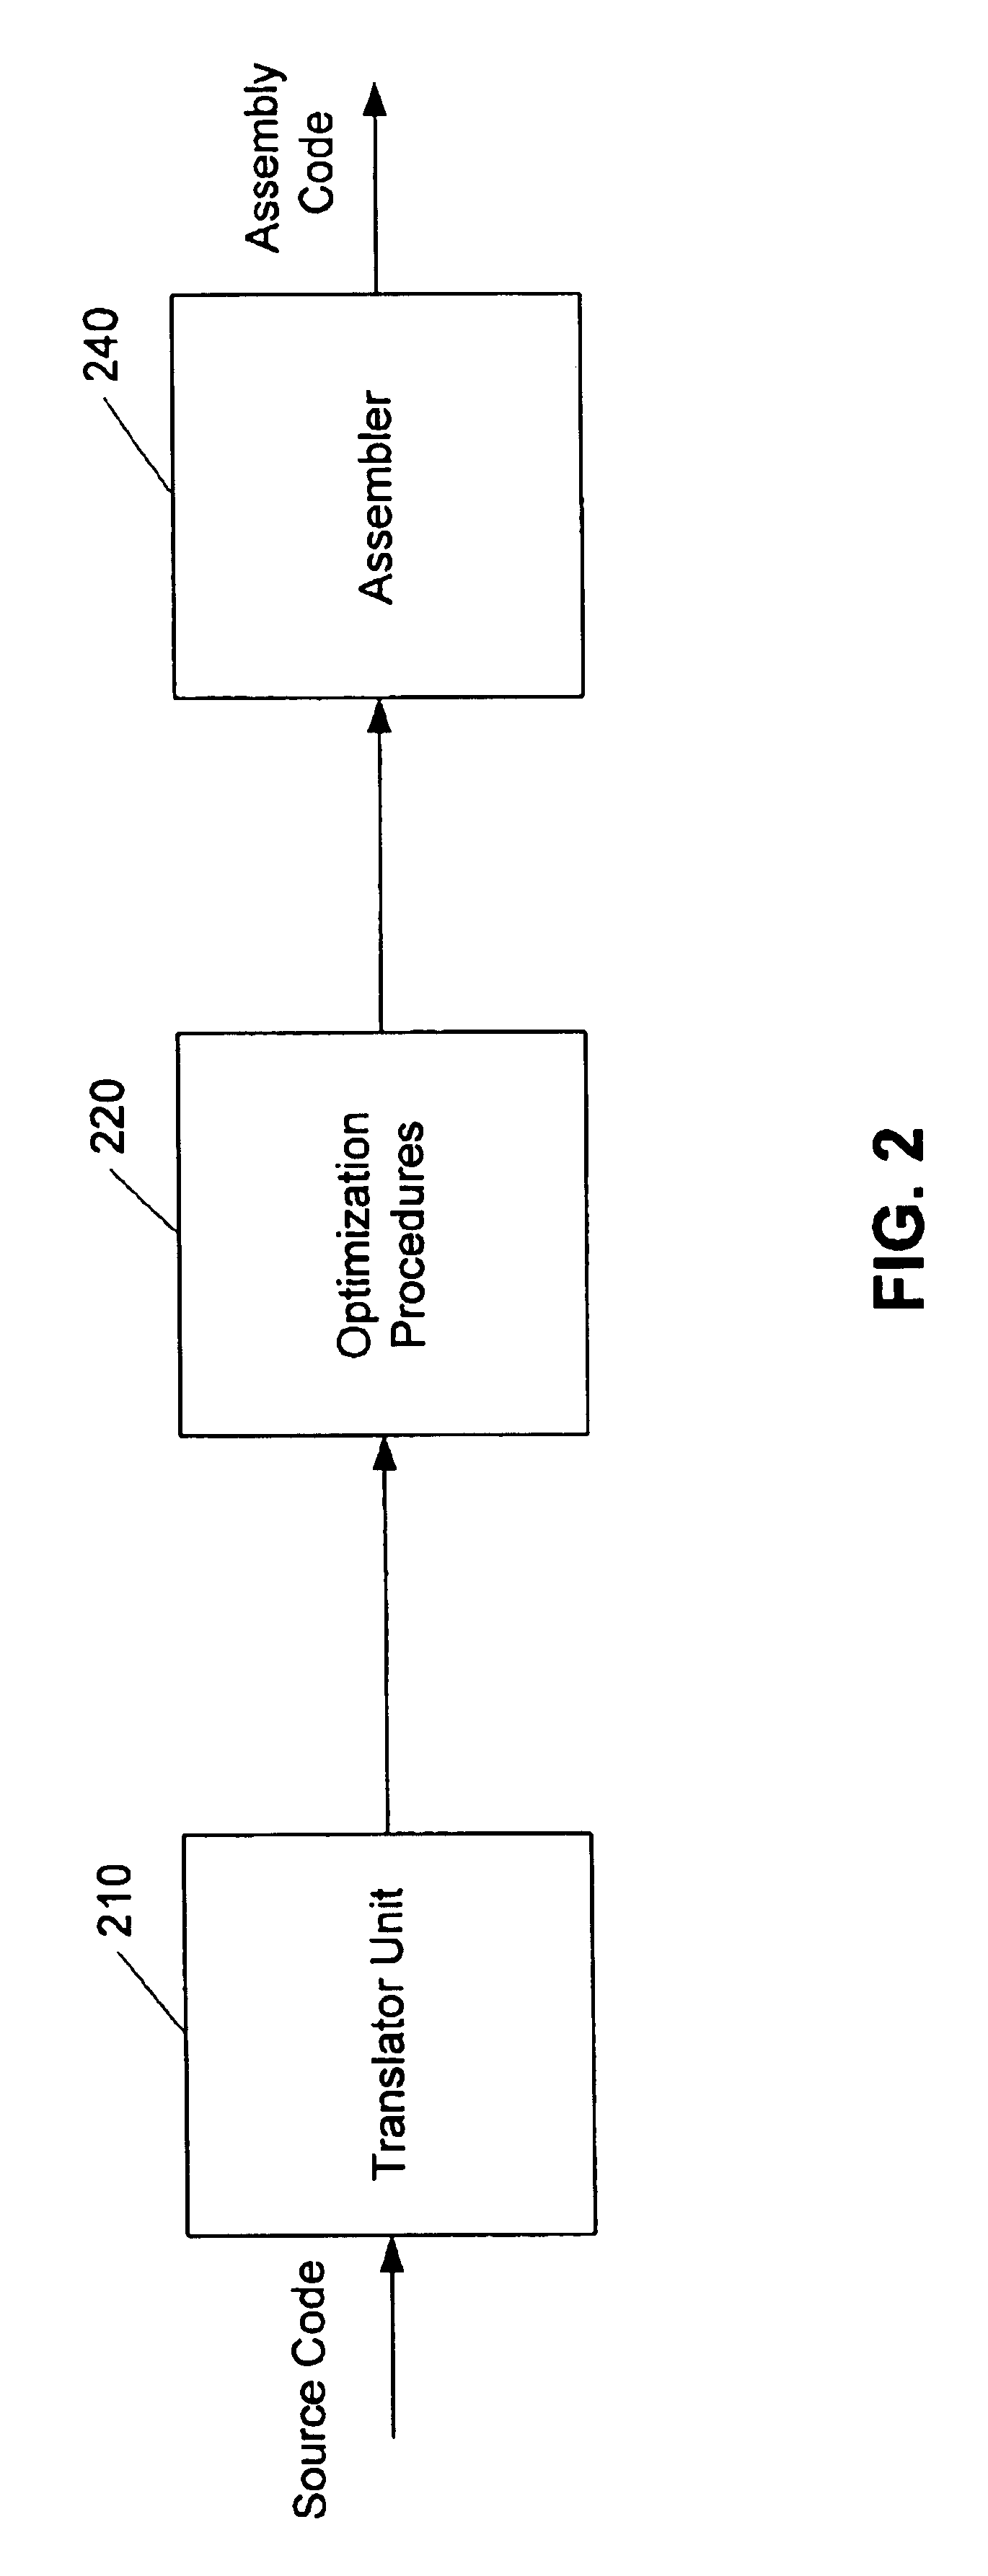 Methods and apparatus for compiling computer programs using partial function inlining